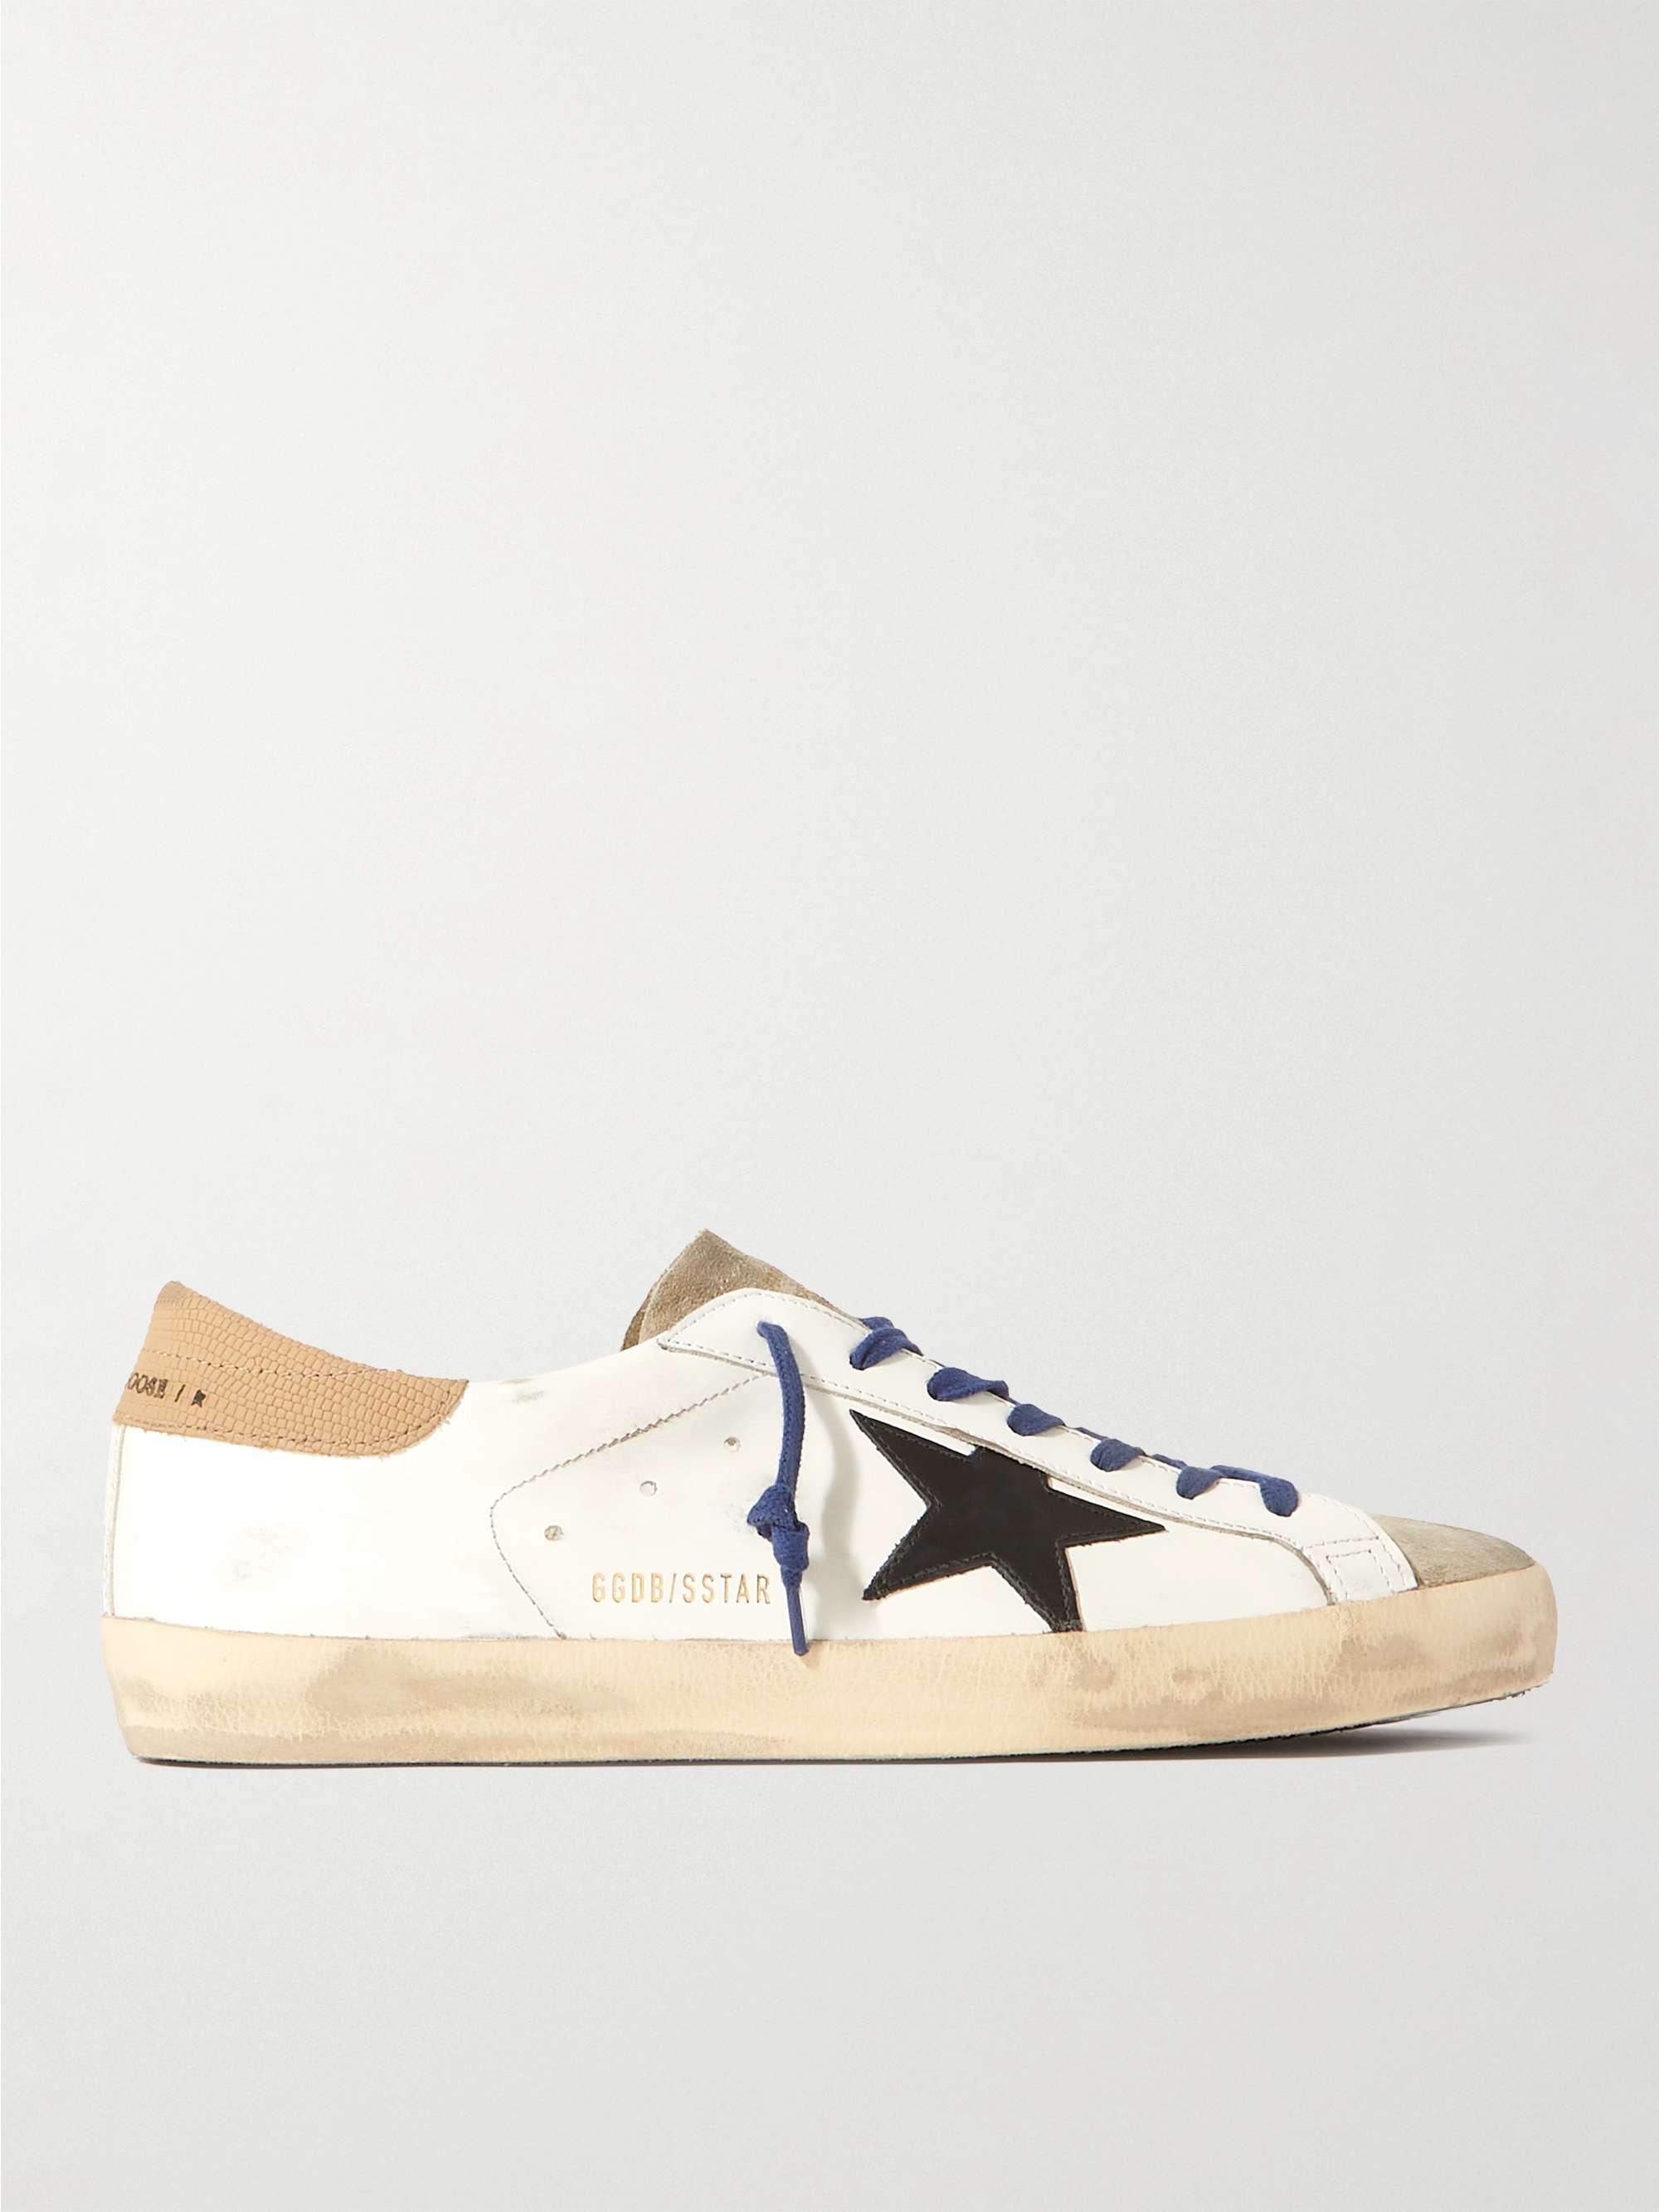 GOLDEN GOOSE Superstar Distressed Leather and Suede Sneakers for Men | MR  PORTER